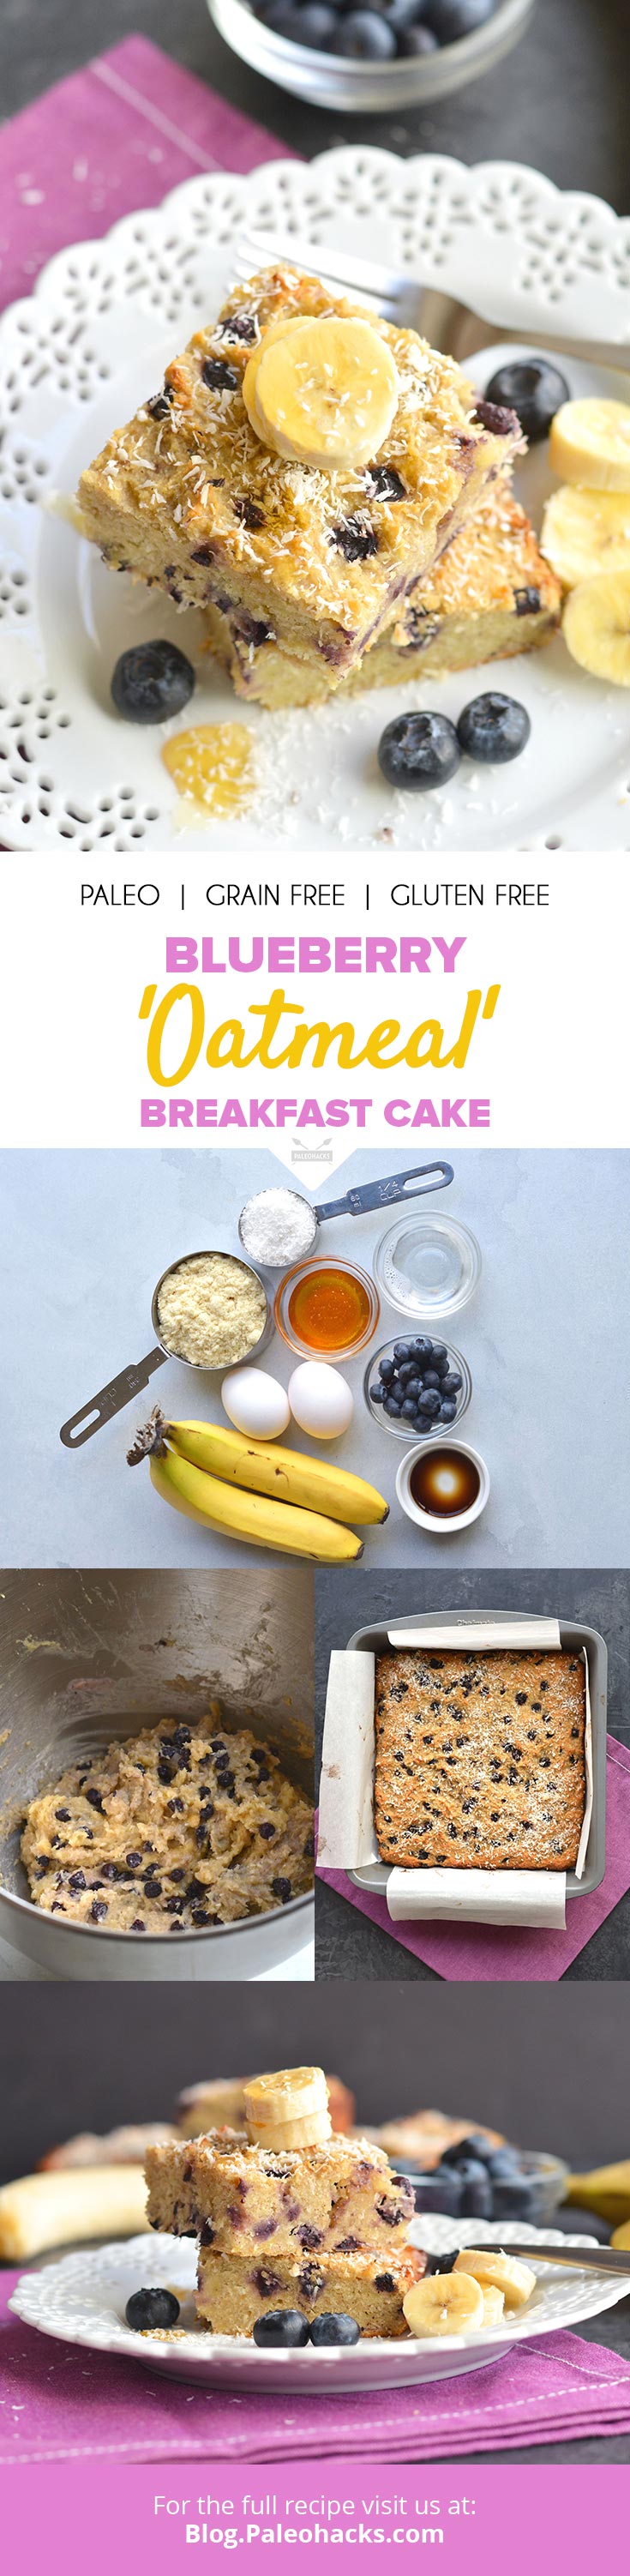 Have cake for breakfast with this grain-free “oatmeal” cake bursting with sweet blueberries!